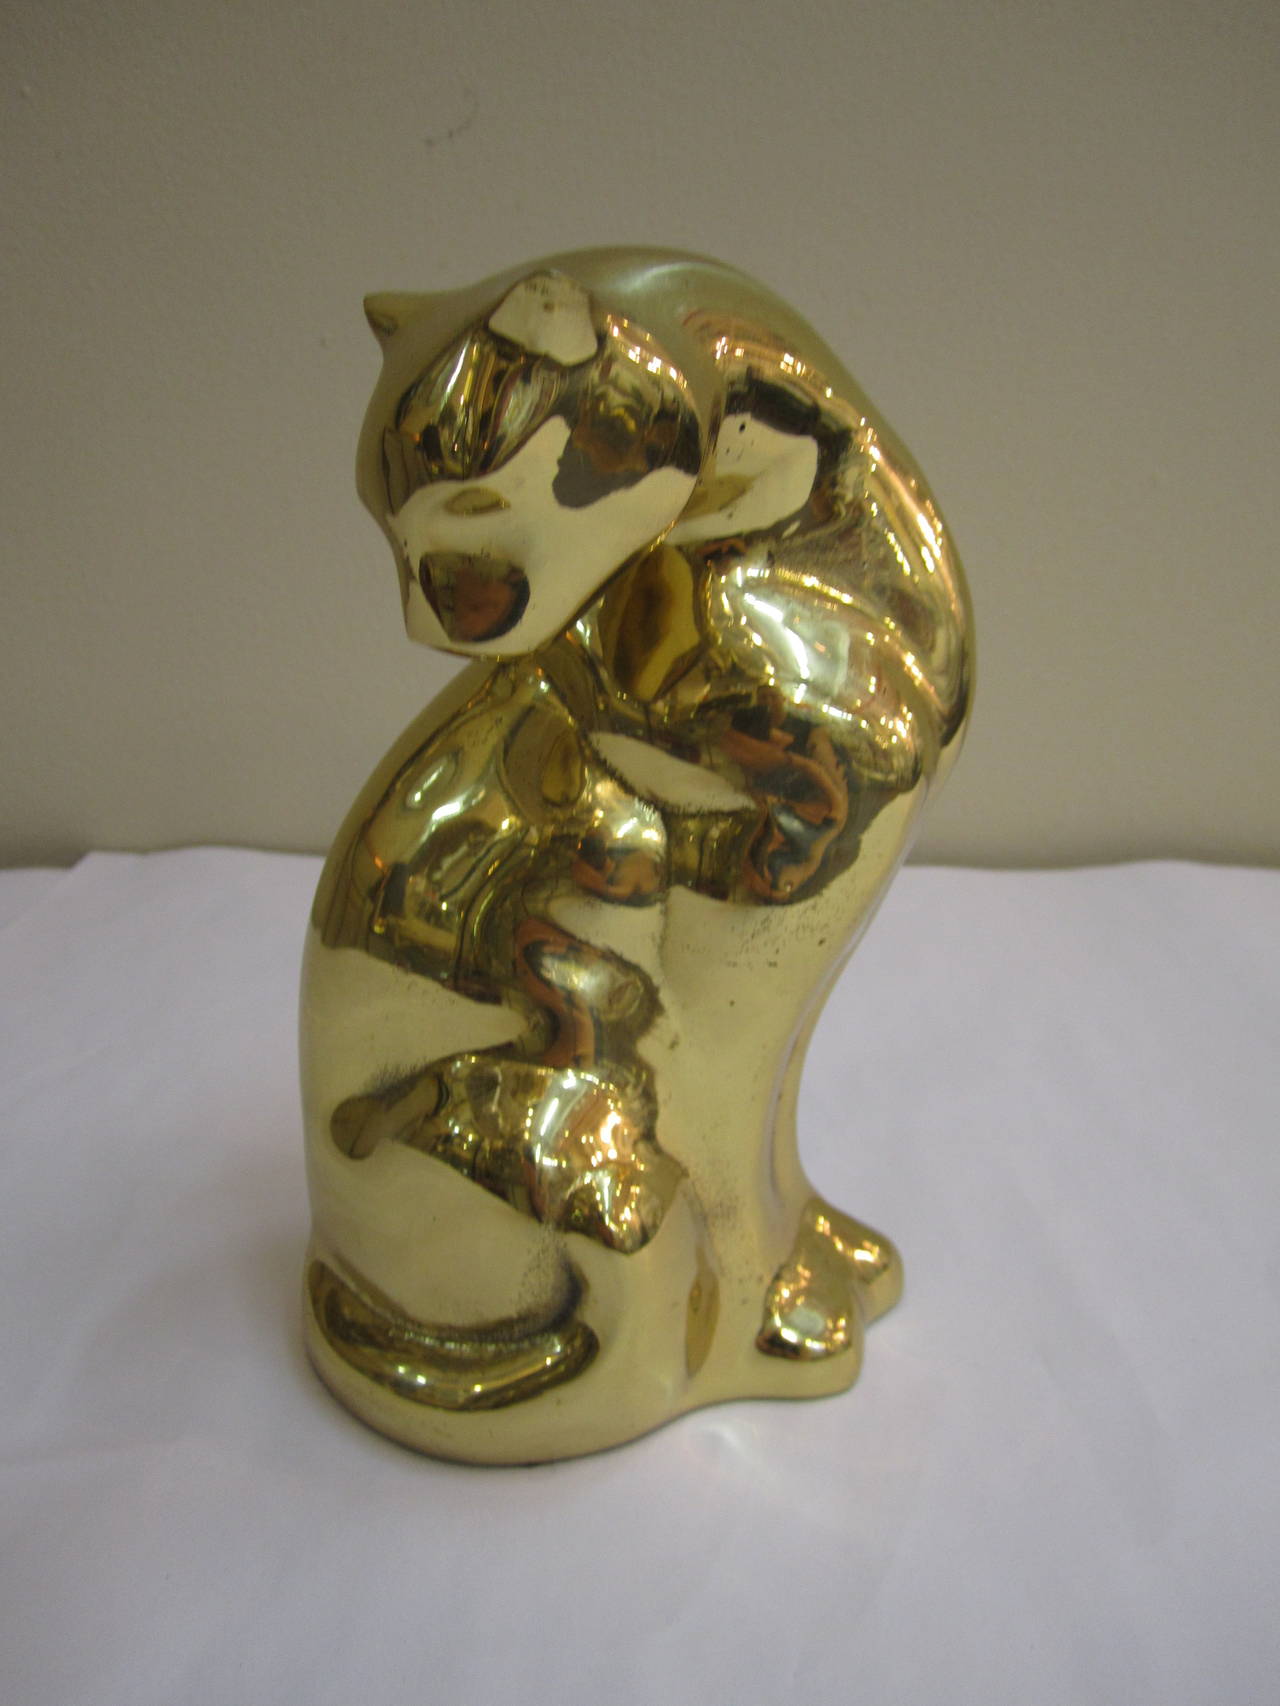 American Modern Brass Cheetah or Panther Cat Sculpture in the Style of Cartier, 1970s